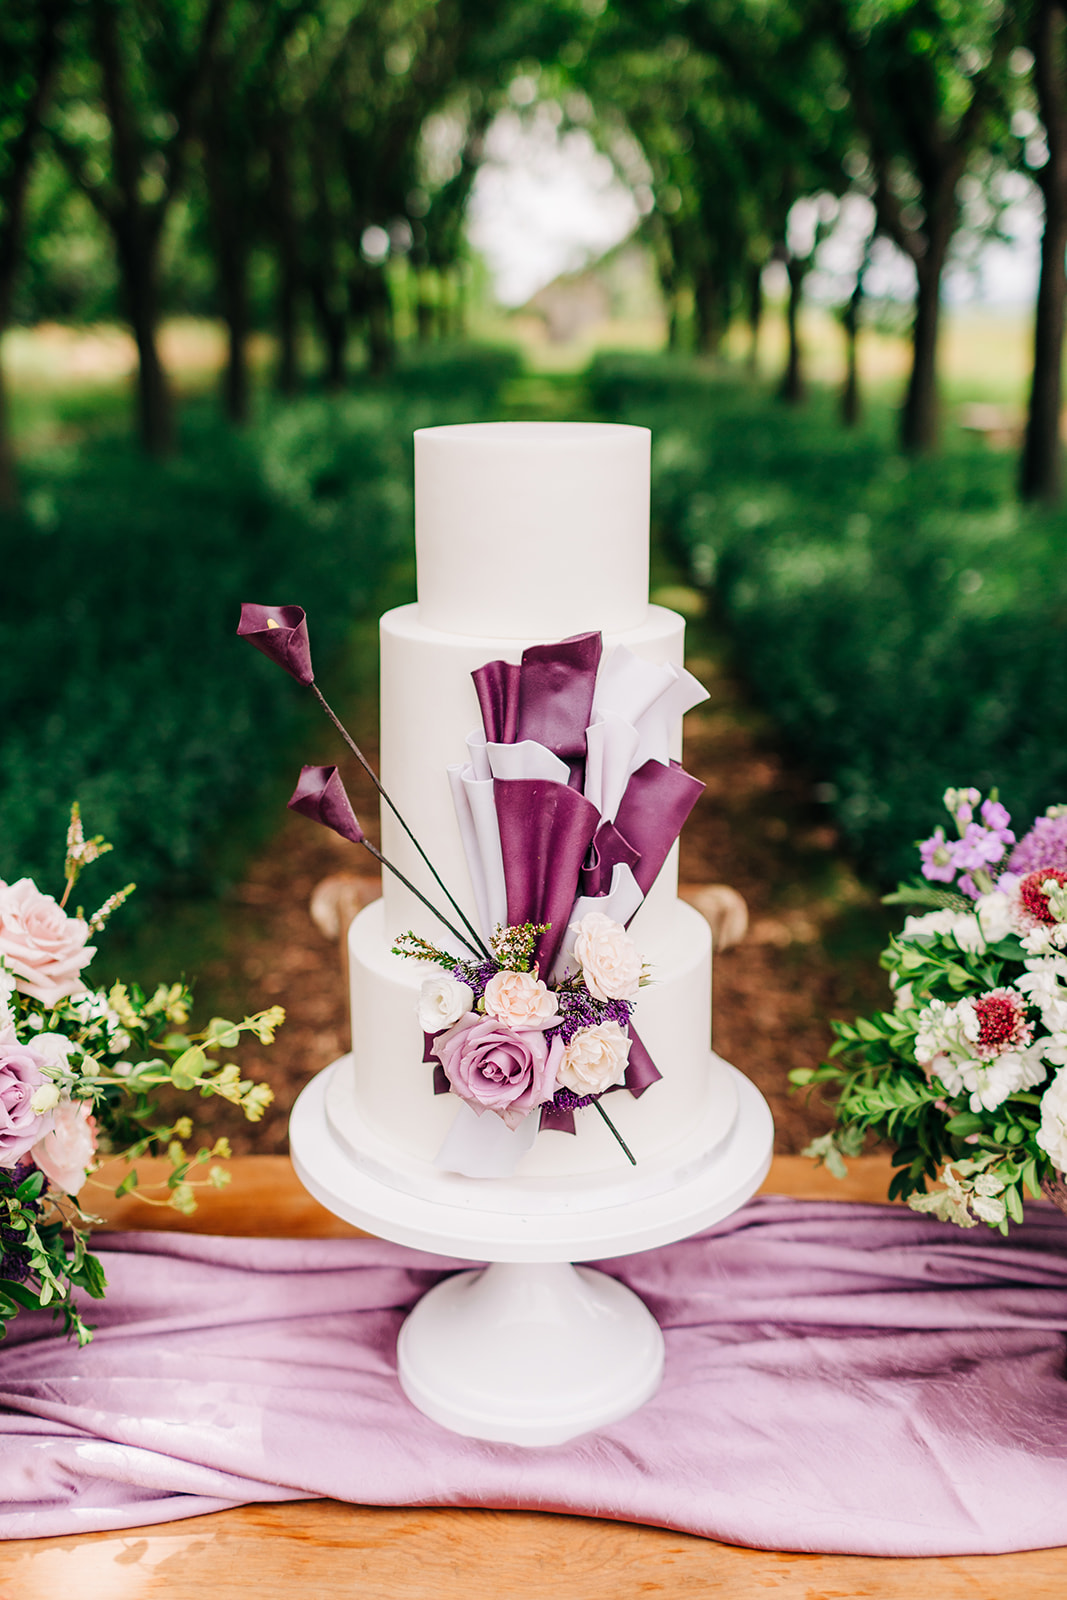 show-stopping wedding cake with purple and white floral cake with vibrant purple flowers